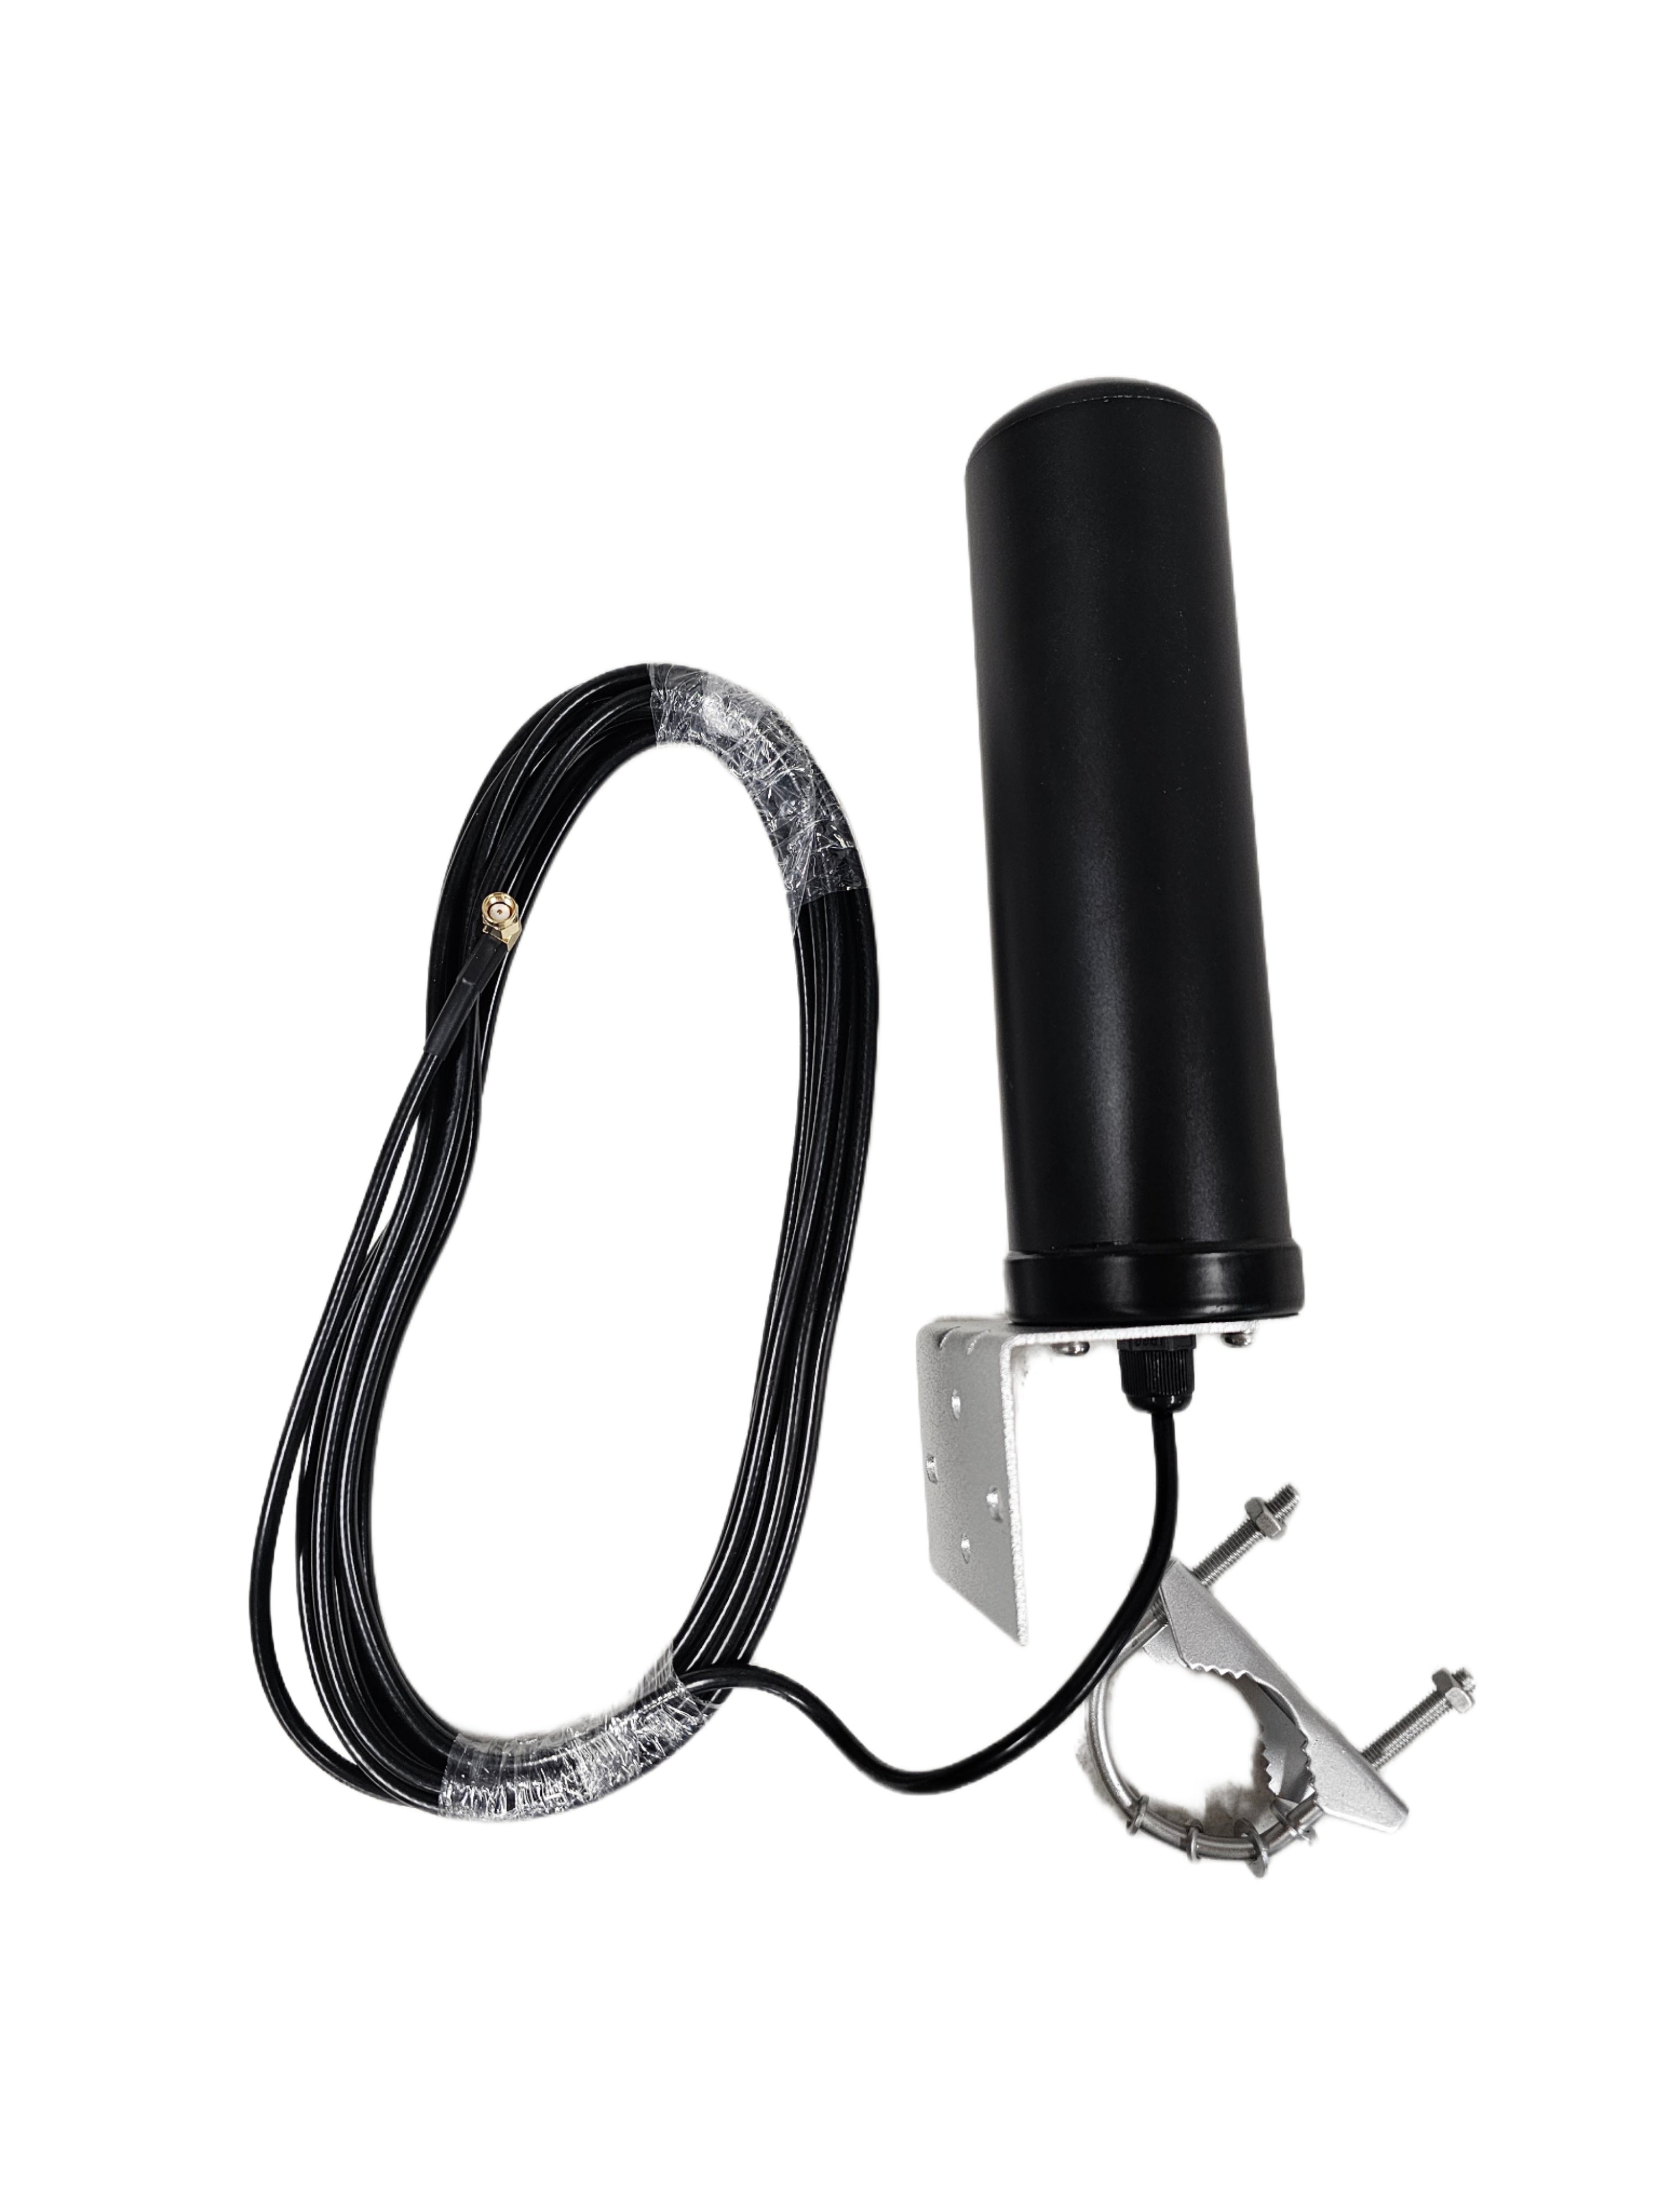 Cellular Trail Camera Booster Antenna Omni-Directional